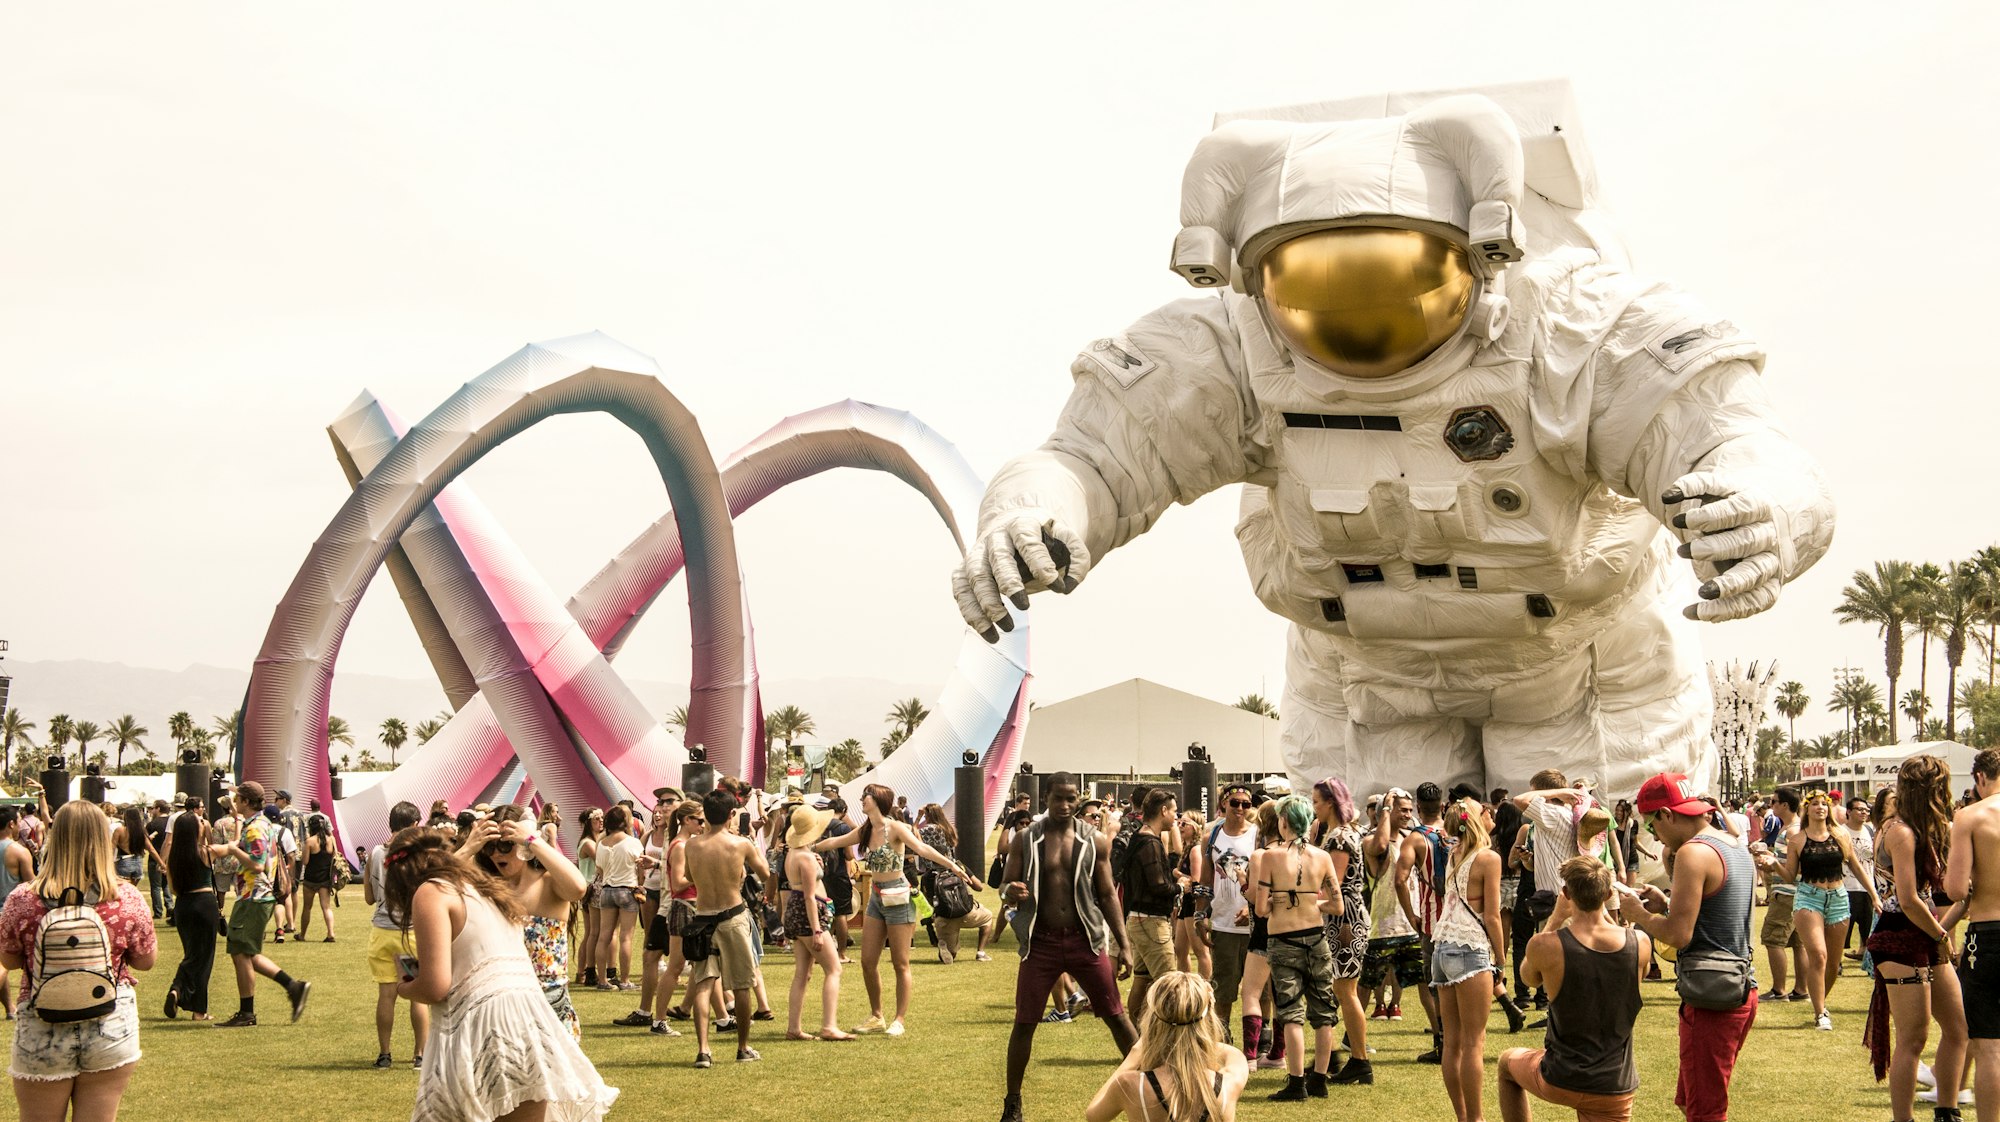 Does a Coachella Performance Affect Social and Streaming Stats for Coachella Artists?